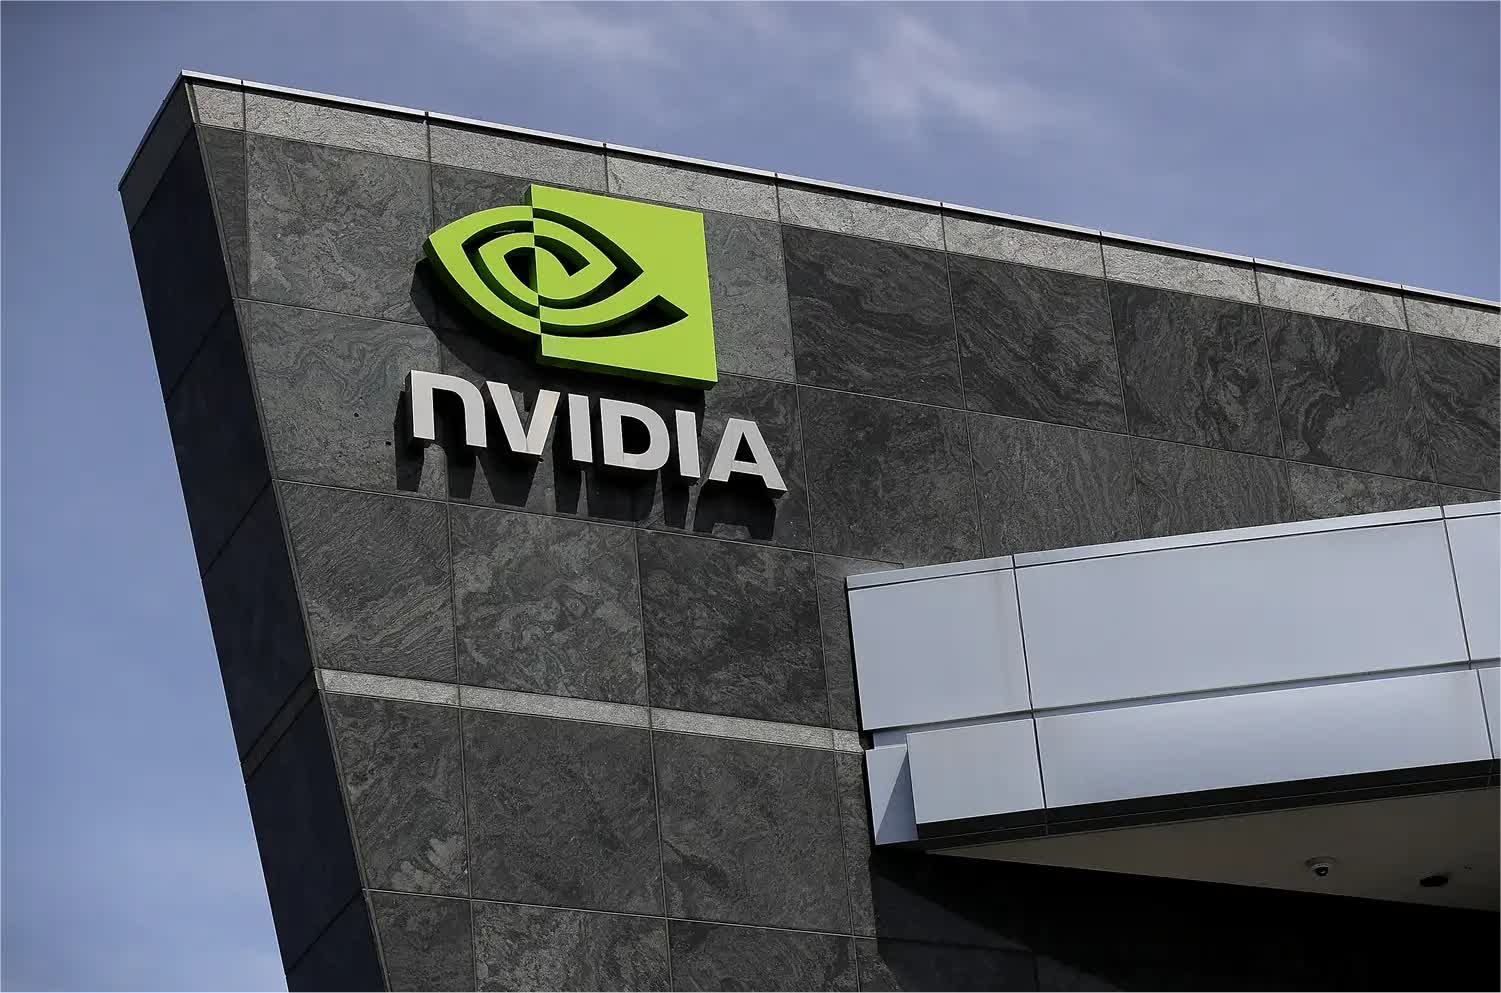 Nvidia hovering market cap nears Amazon and Alphabet, fueled by surging AI demand